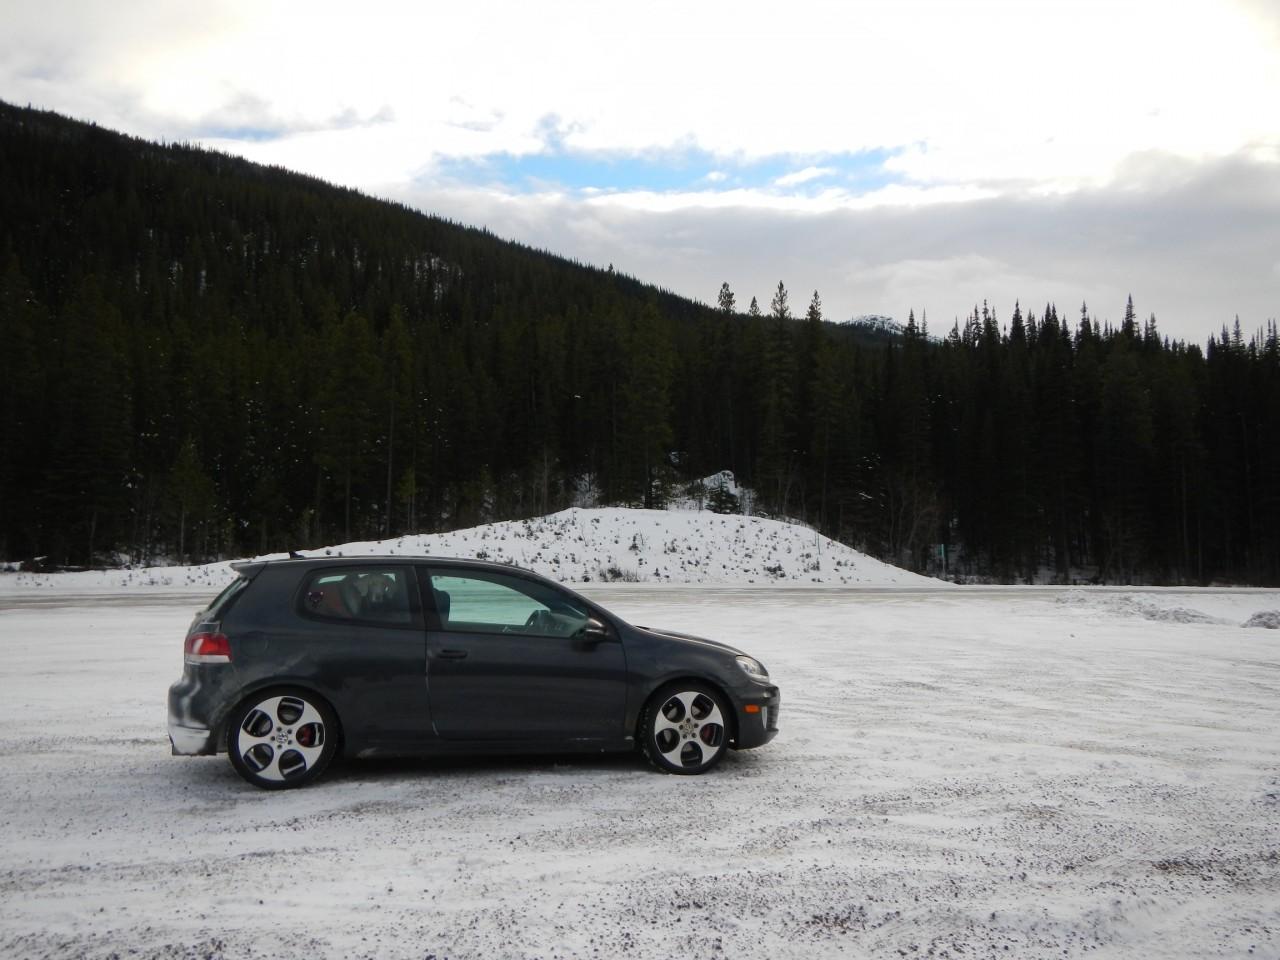 VW GTI parked lakeside in the snow